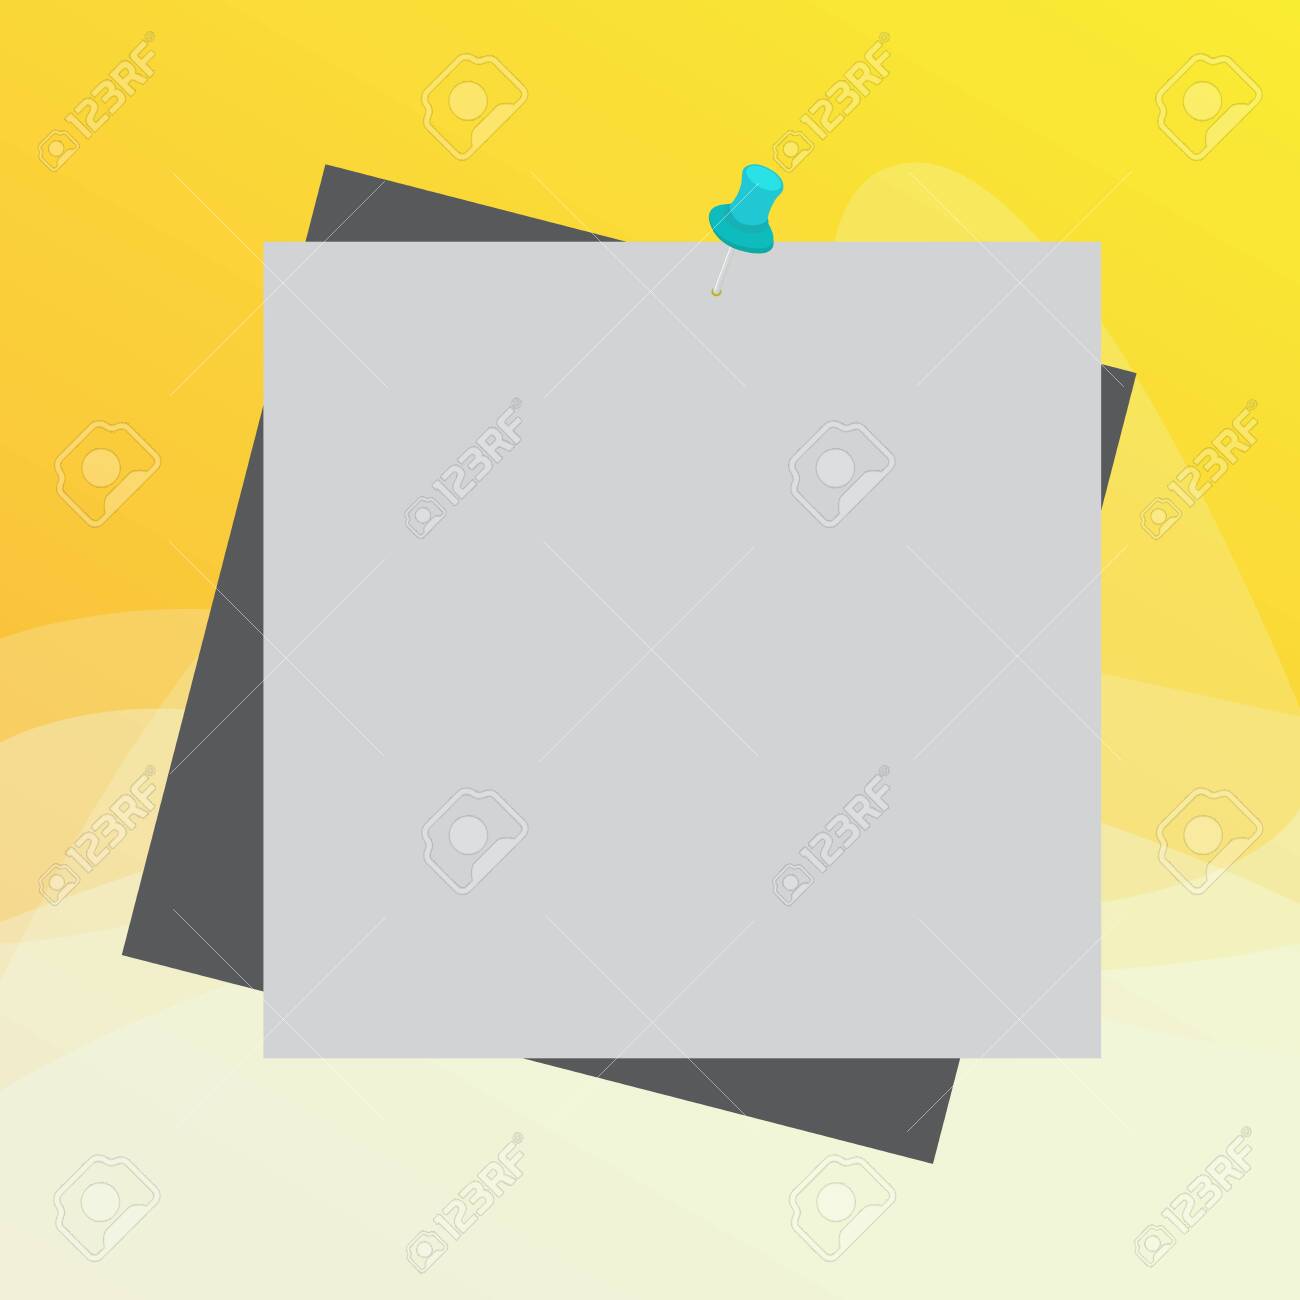 Reminder Color Background Thumbtack Tack Memo Attached Office